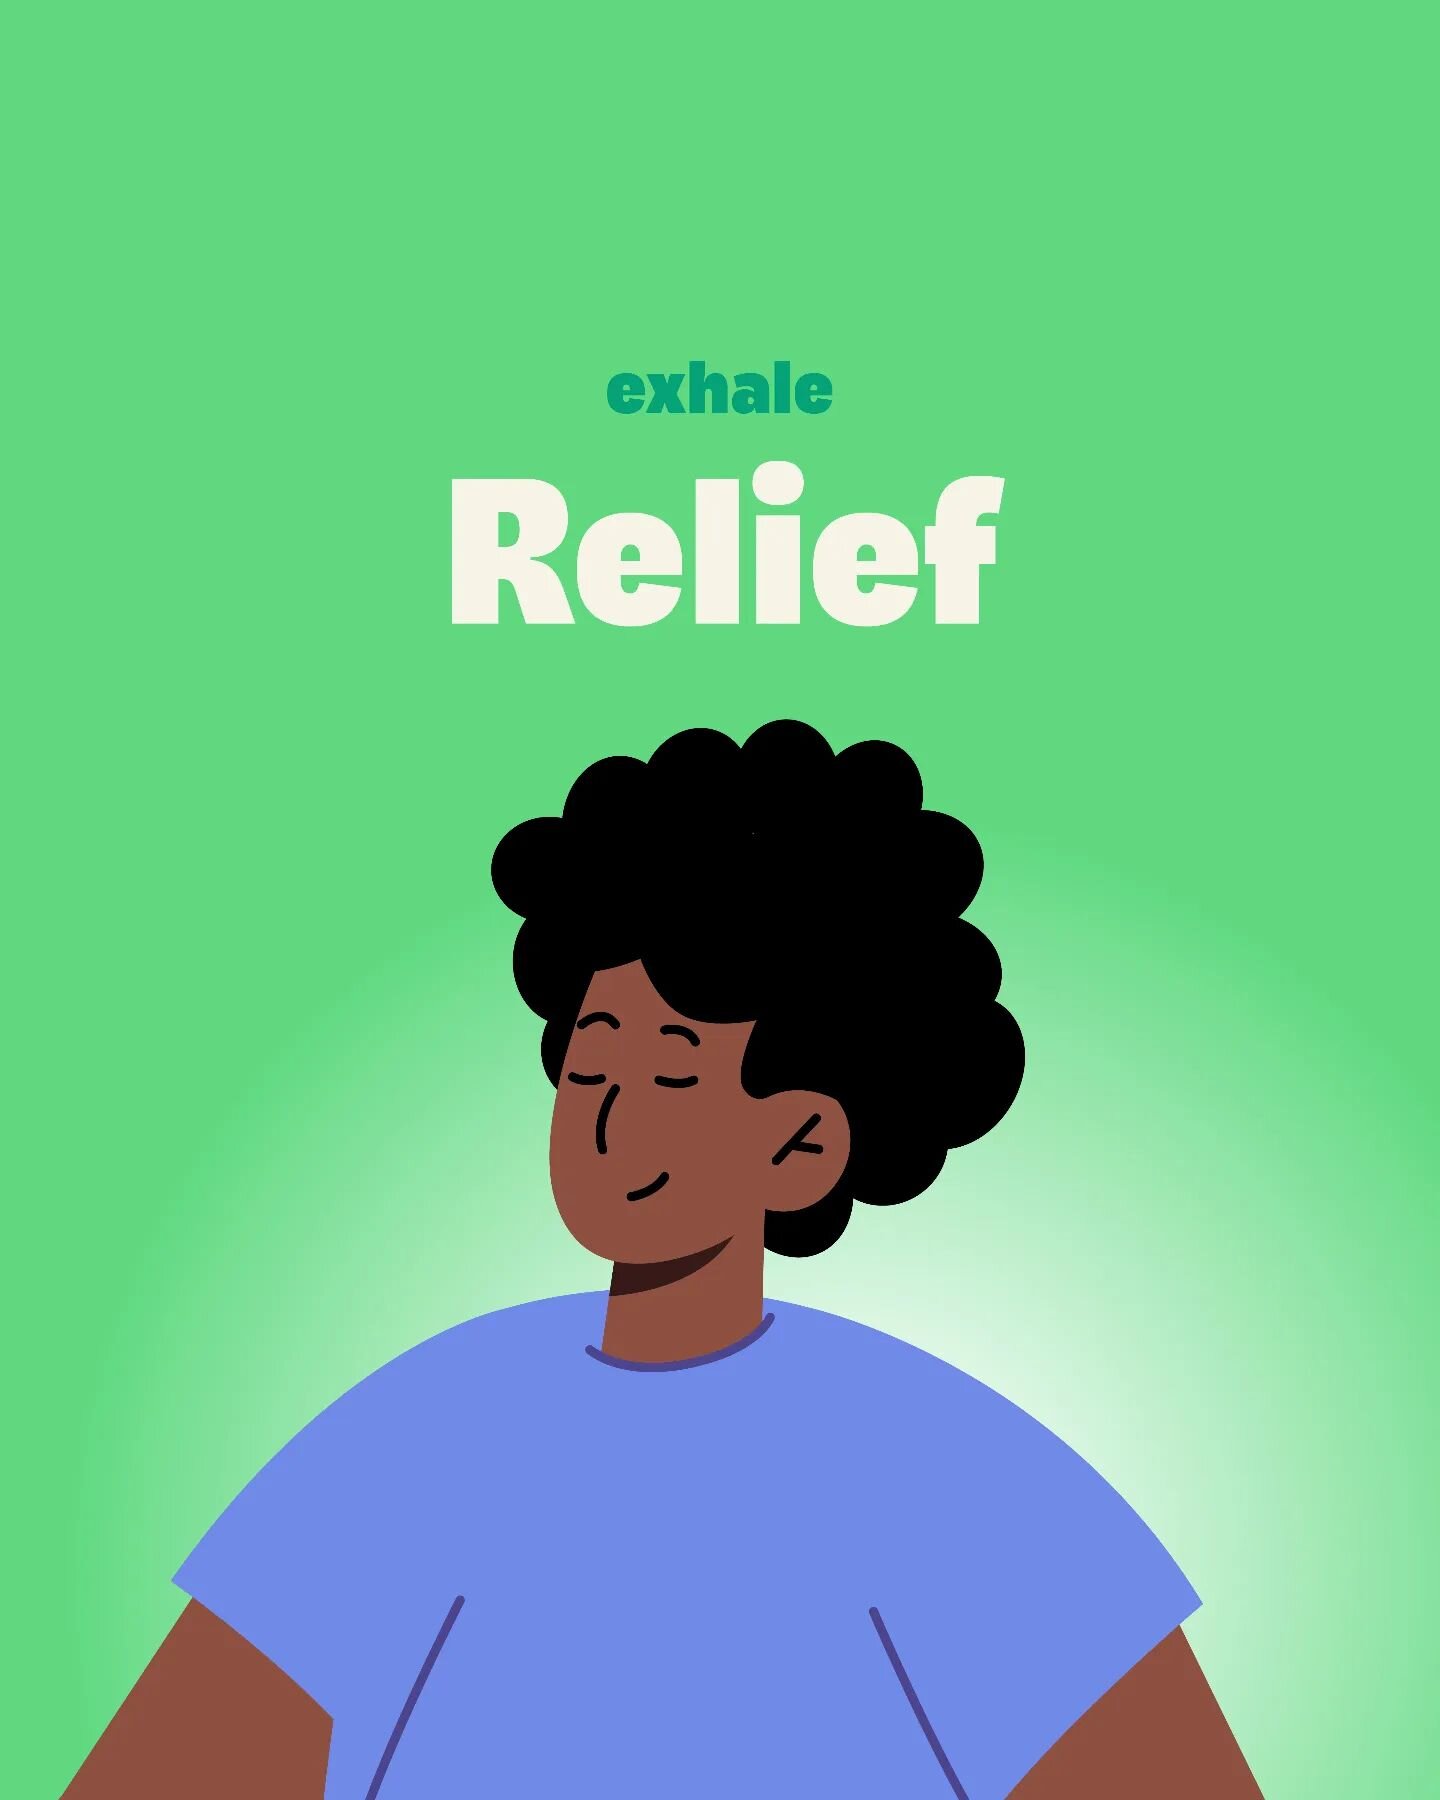 We've curated a library of playlists on Spotify for various moods and situations. Our Relief playlist will help you relieve some of your daily stress.&nbsp;

Follow the link in our bio to follow our Spotify profile.

#exhalebetter #exhaleapp #exhale 